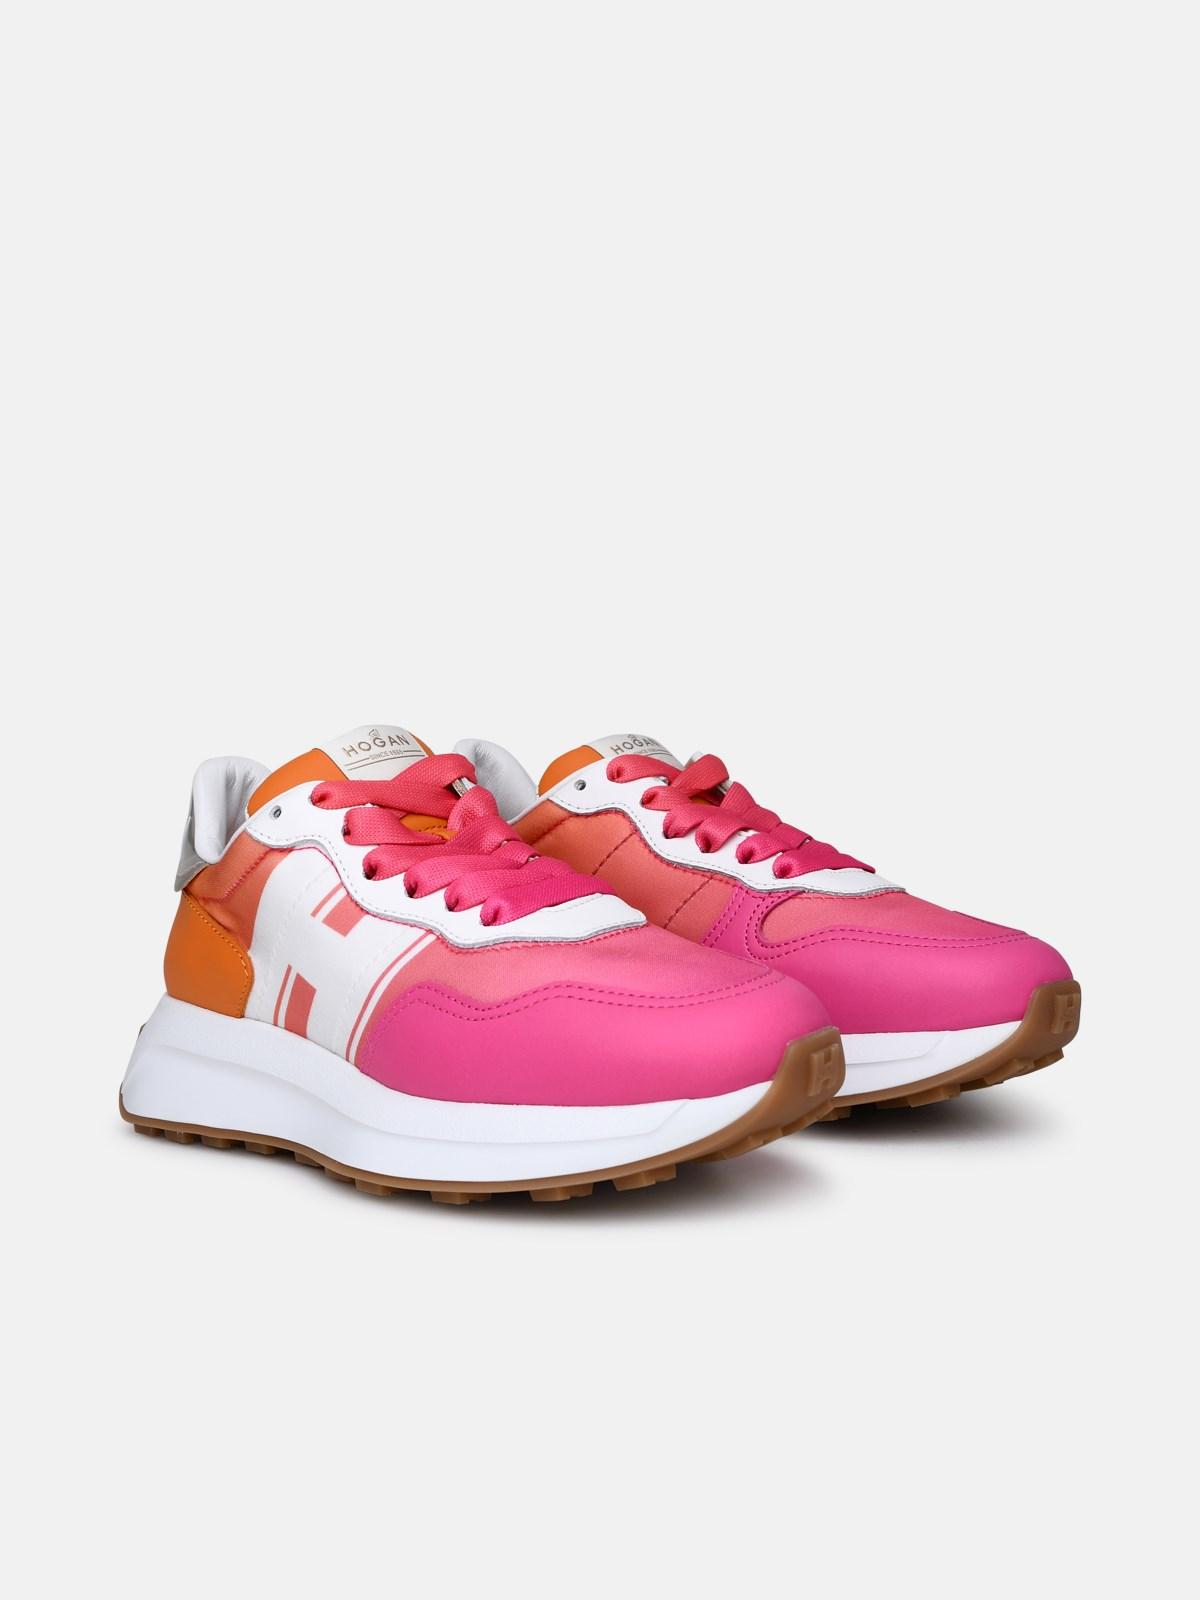 Hogan H641 Orange And Pink Leather Sneakers | Lyst